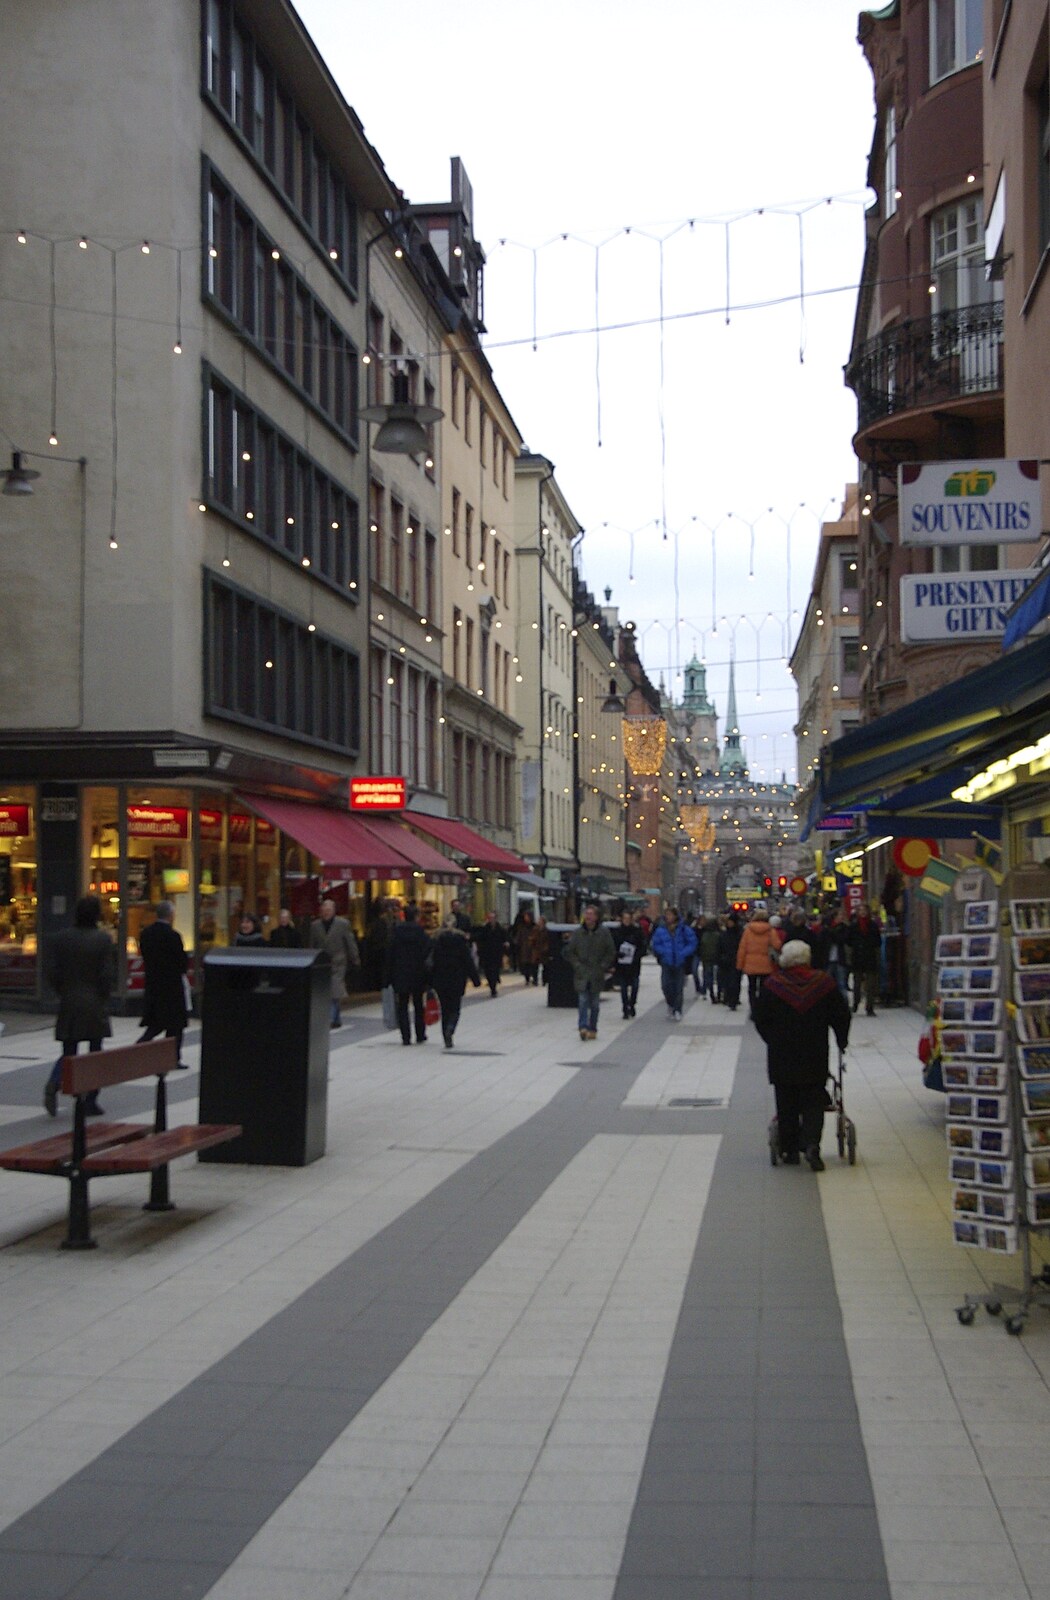 One of the main shopping streets from Gamla Stan, Stockholm, Sweden - 15th December 2007